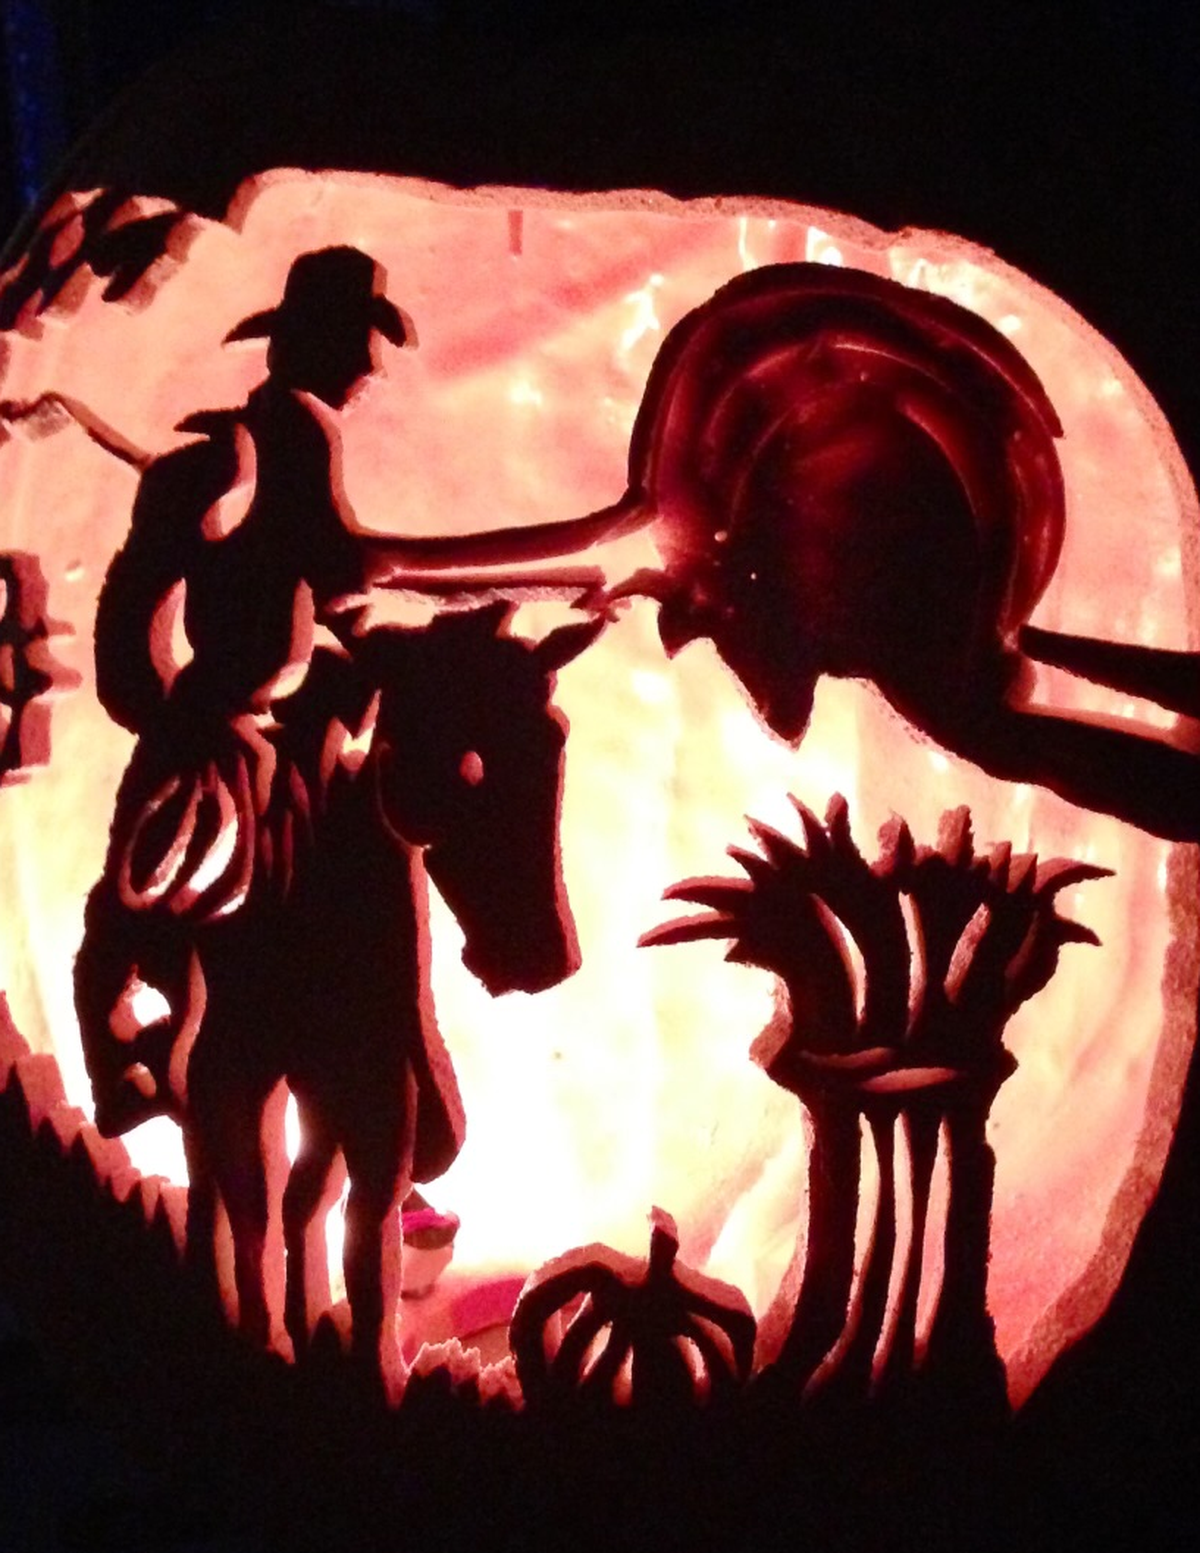 Eric Frickle and family keep images from their favorite, intricate pumpkin carvings.  (Courtesy Eric Frickle)